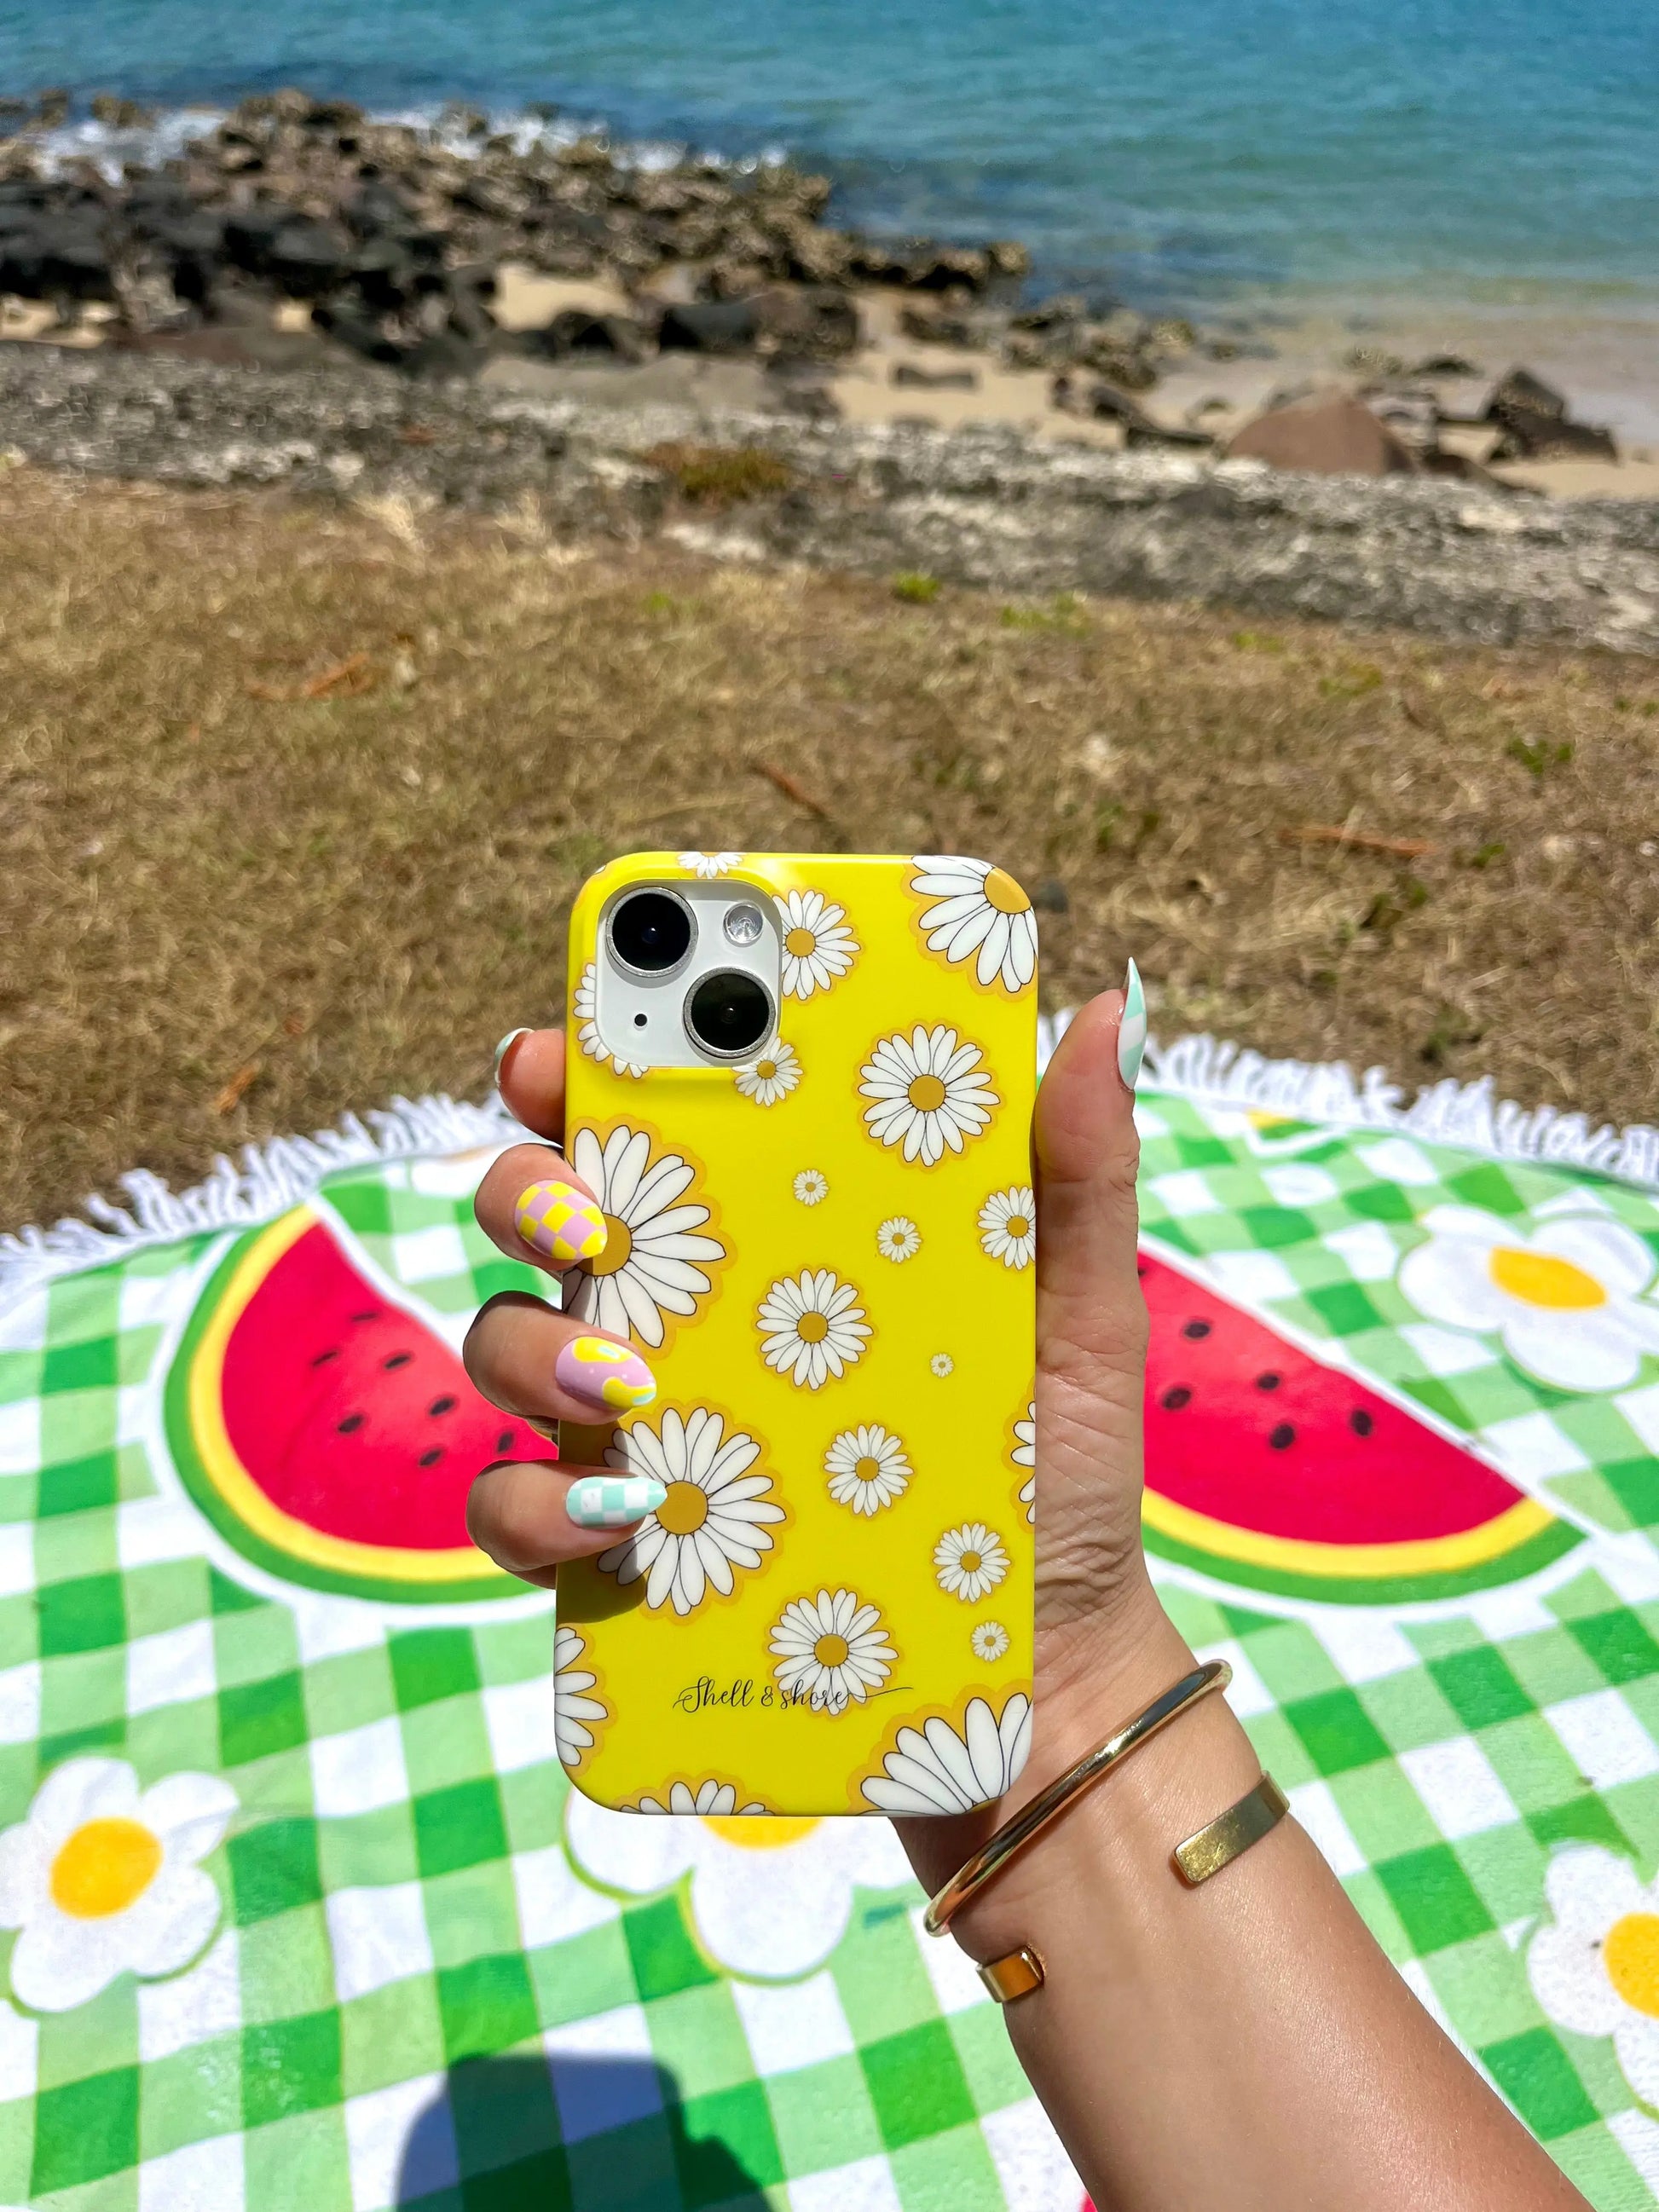 Summer Daisy iPhone Case Shell And Shore